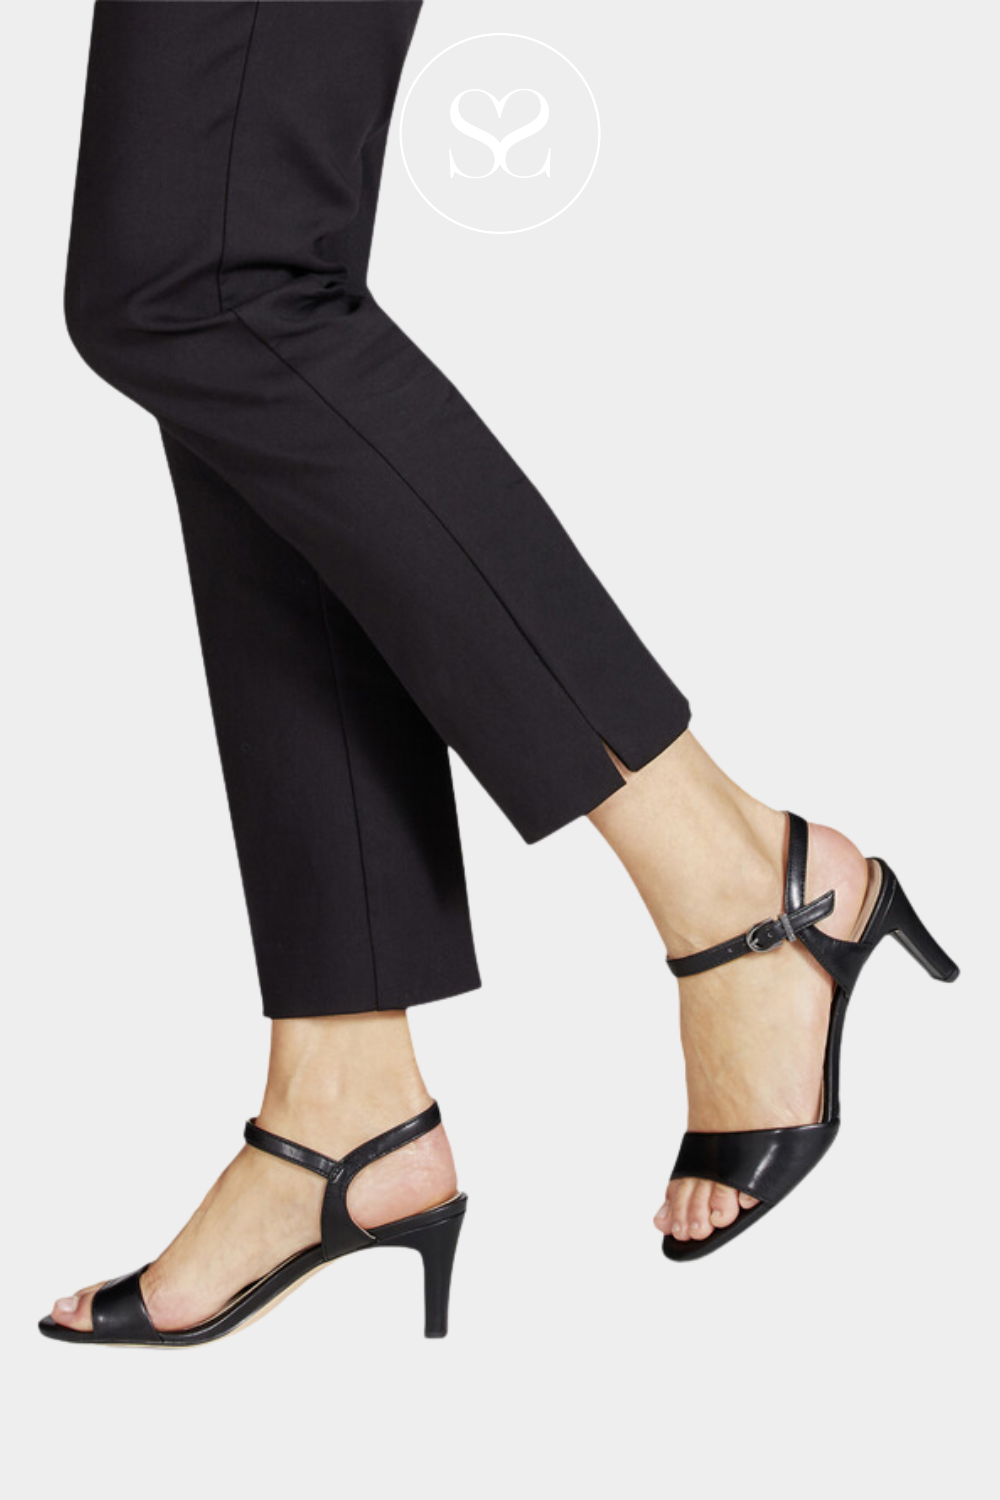 TAMARIS 1-28008-42 BLACK BARELY THERE LOW HEELED SANDALS WITH AN ADJUSTABLE ANKLE STRAP